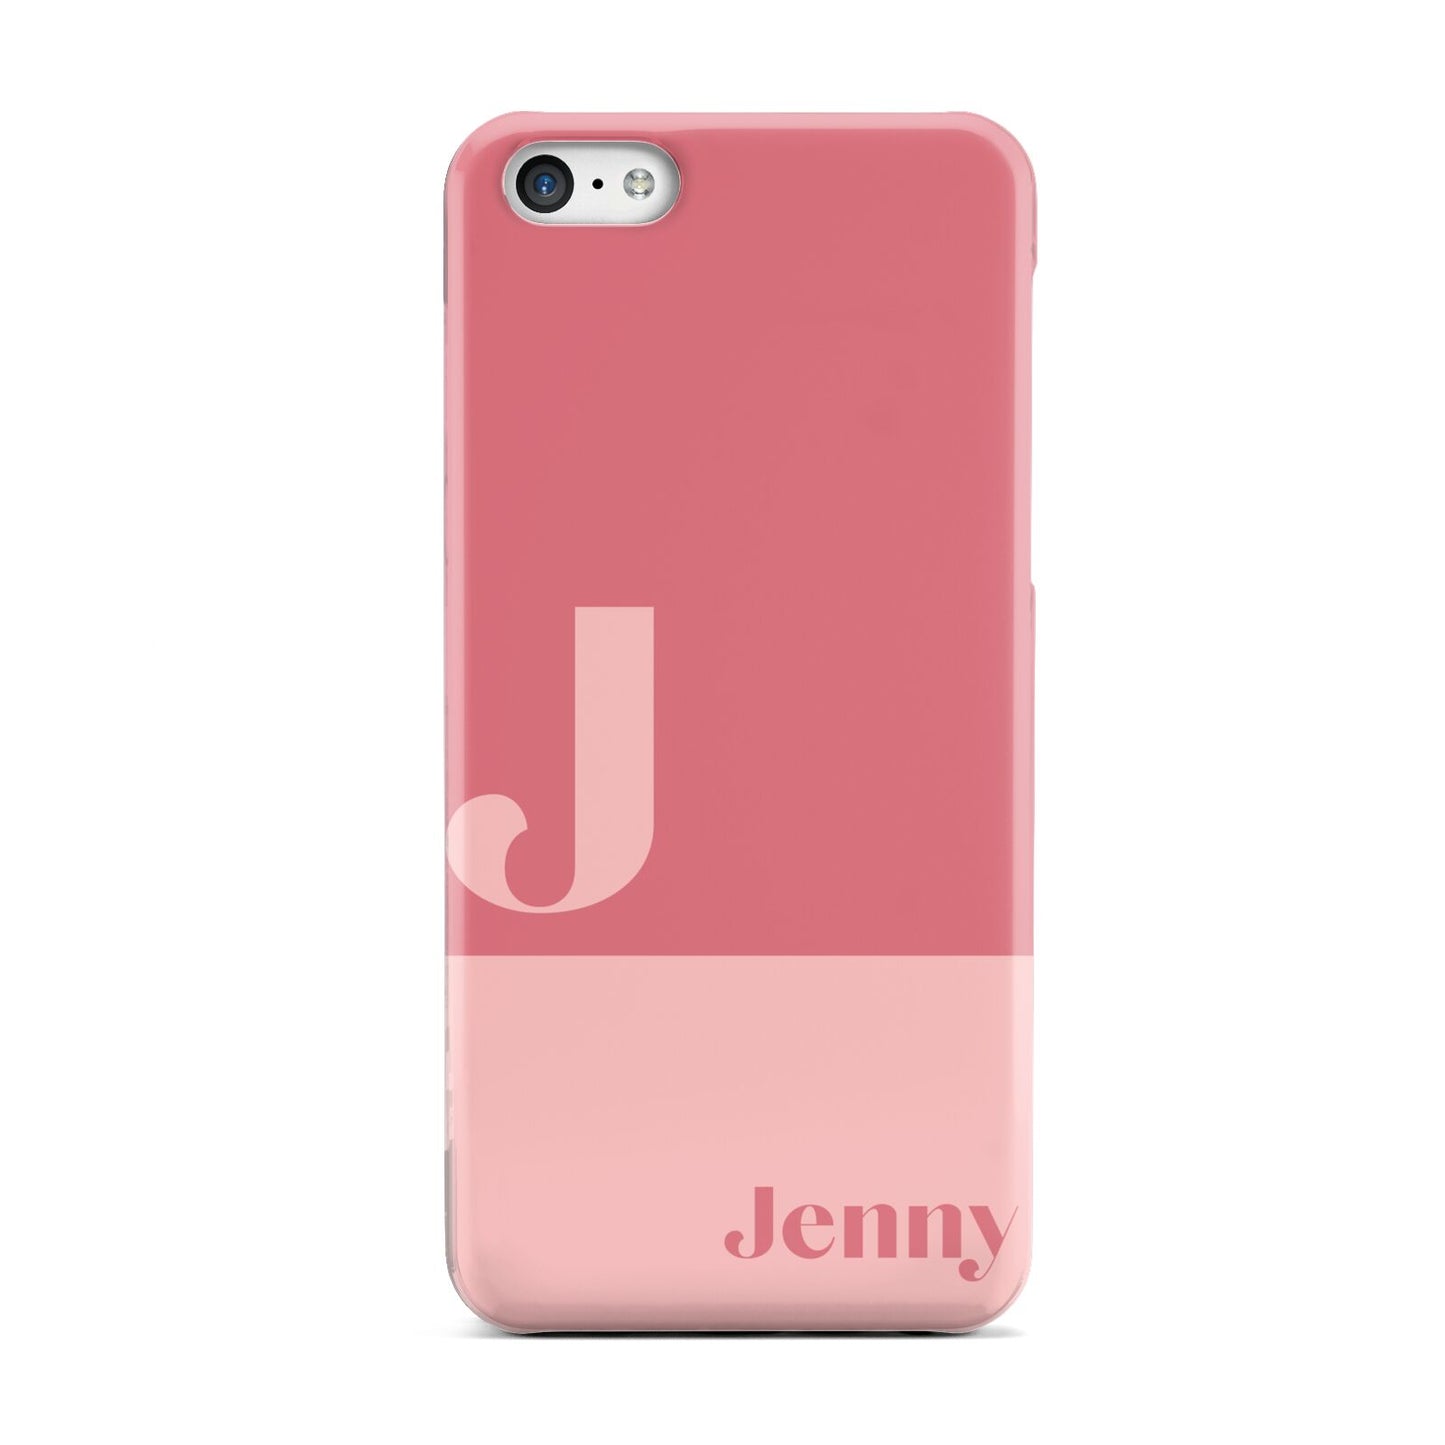 Contrast Personalised Pink Apple iPhone 5c Case